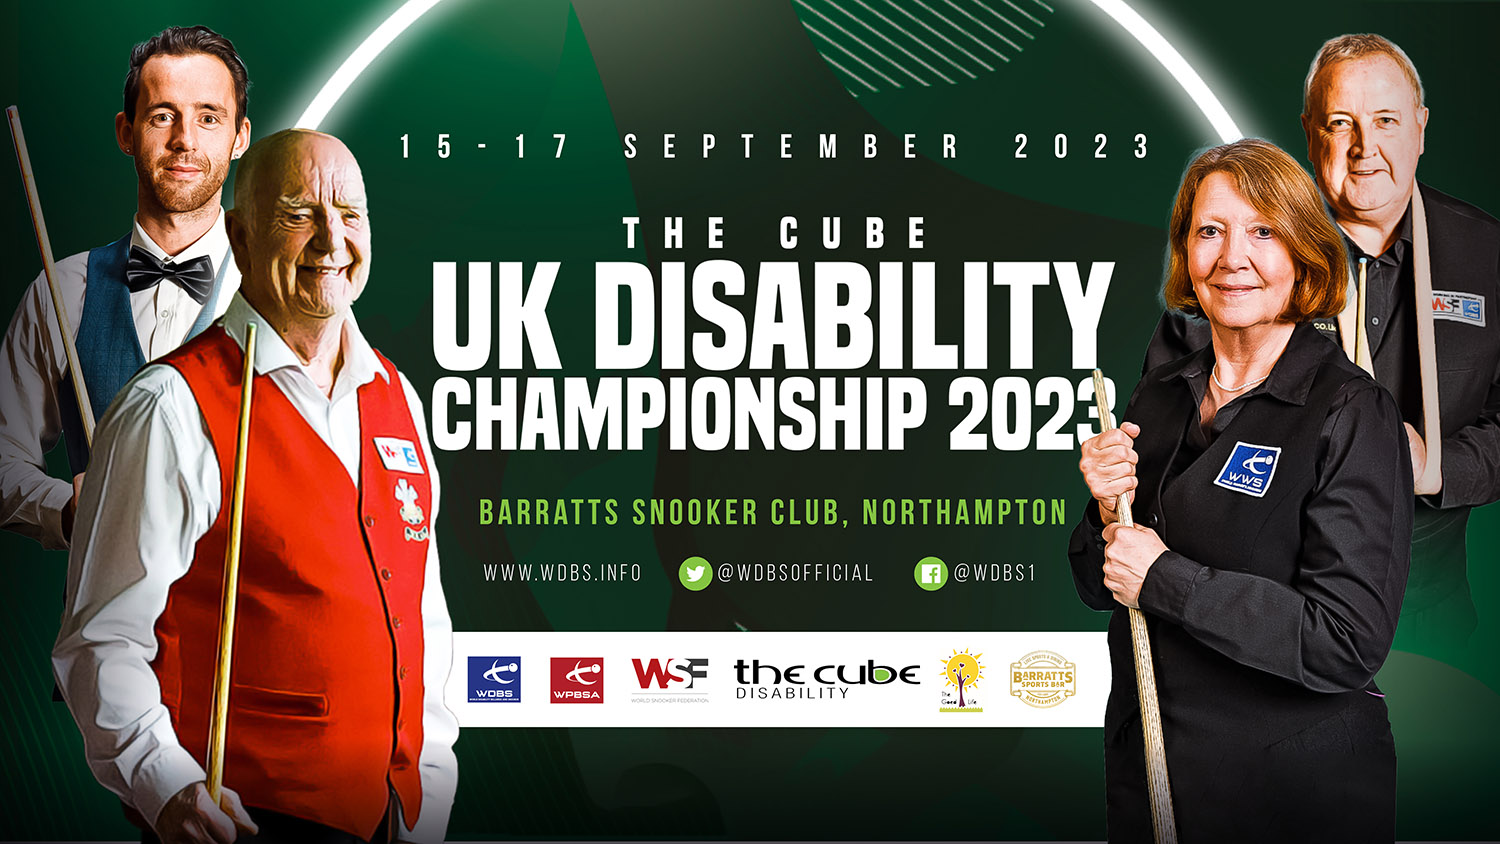 UK Championship banner with details and players smiling